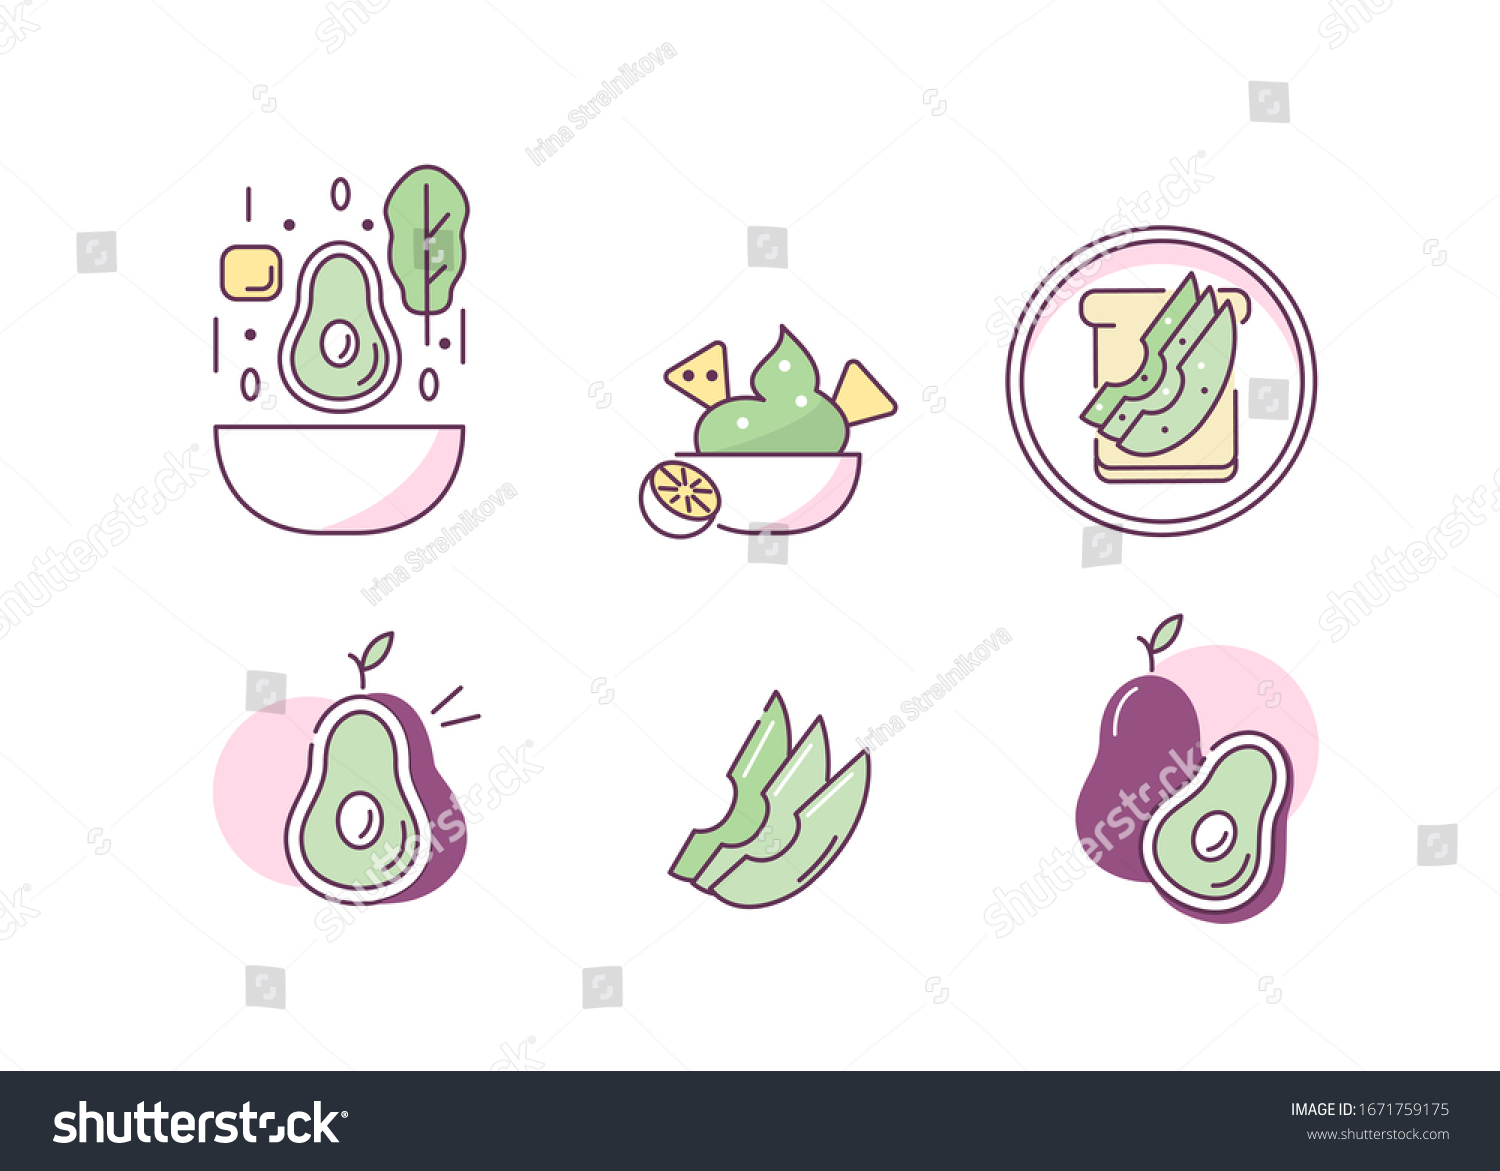 SVG of 
Avocado Fruit and Dishes Icons Set. Various Healthy Meals Symbols. Poke Bowl, Guacamole Dip and Snacks. Cutted in Half and Sliced Avocado Signs Collection. Flat Line Cartoon Vector Illustration. svg